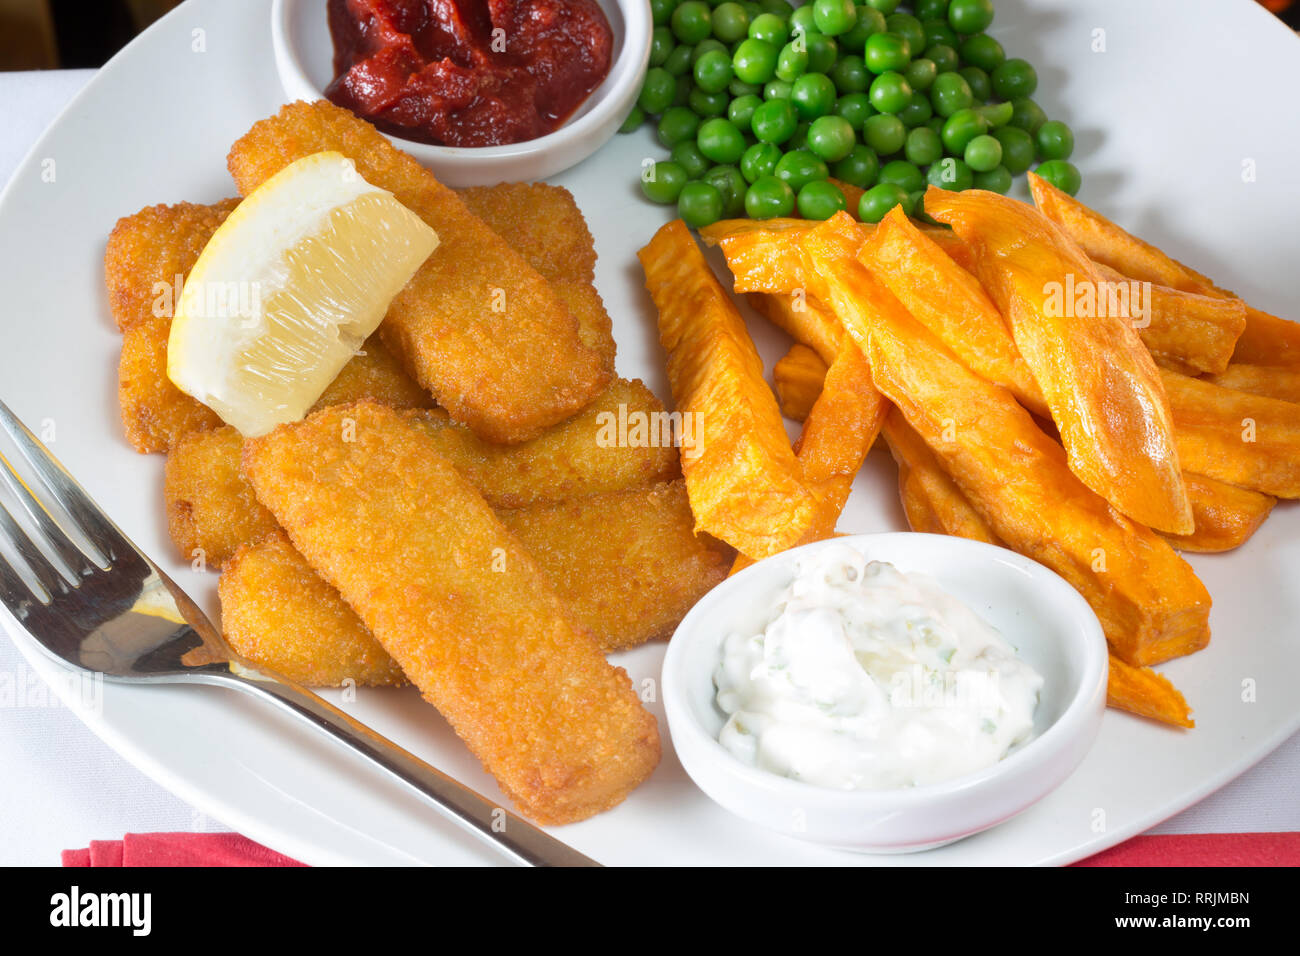 Classic English pub lunch of Fish fingers, chips and garden peas